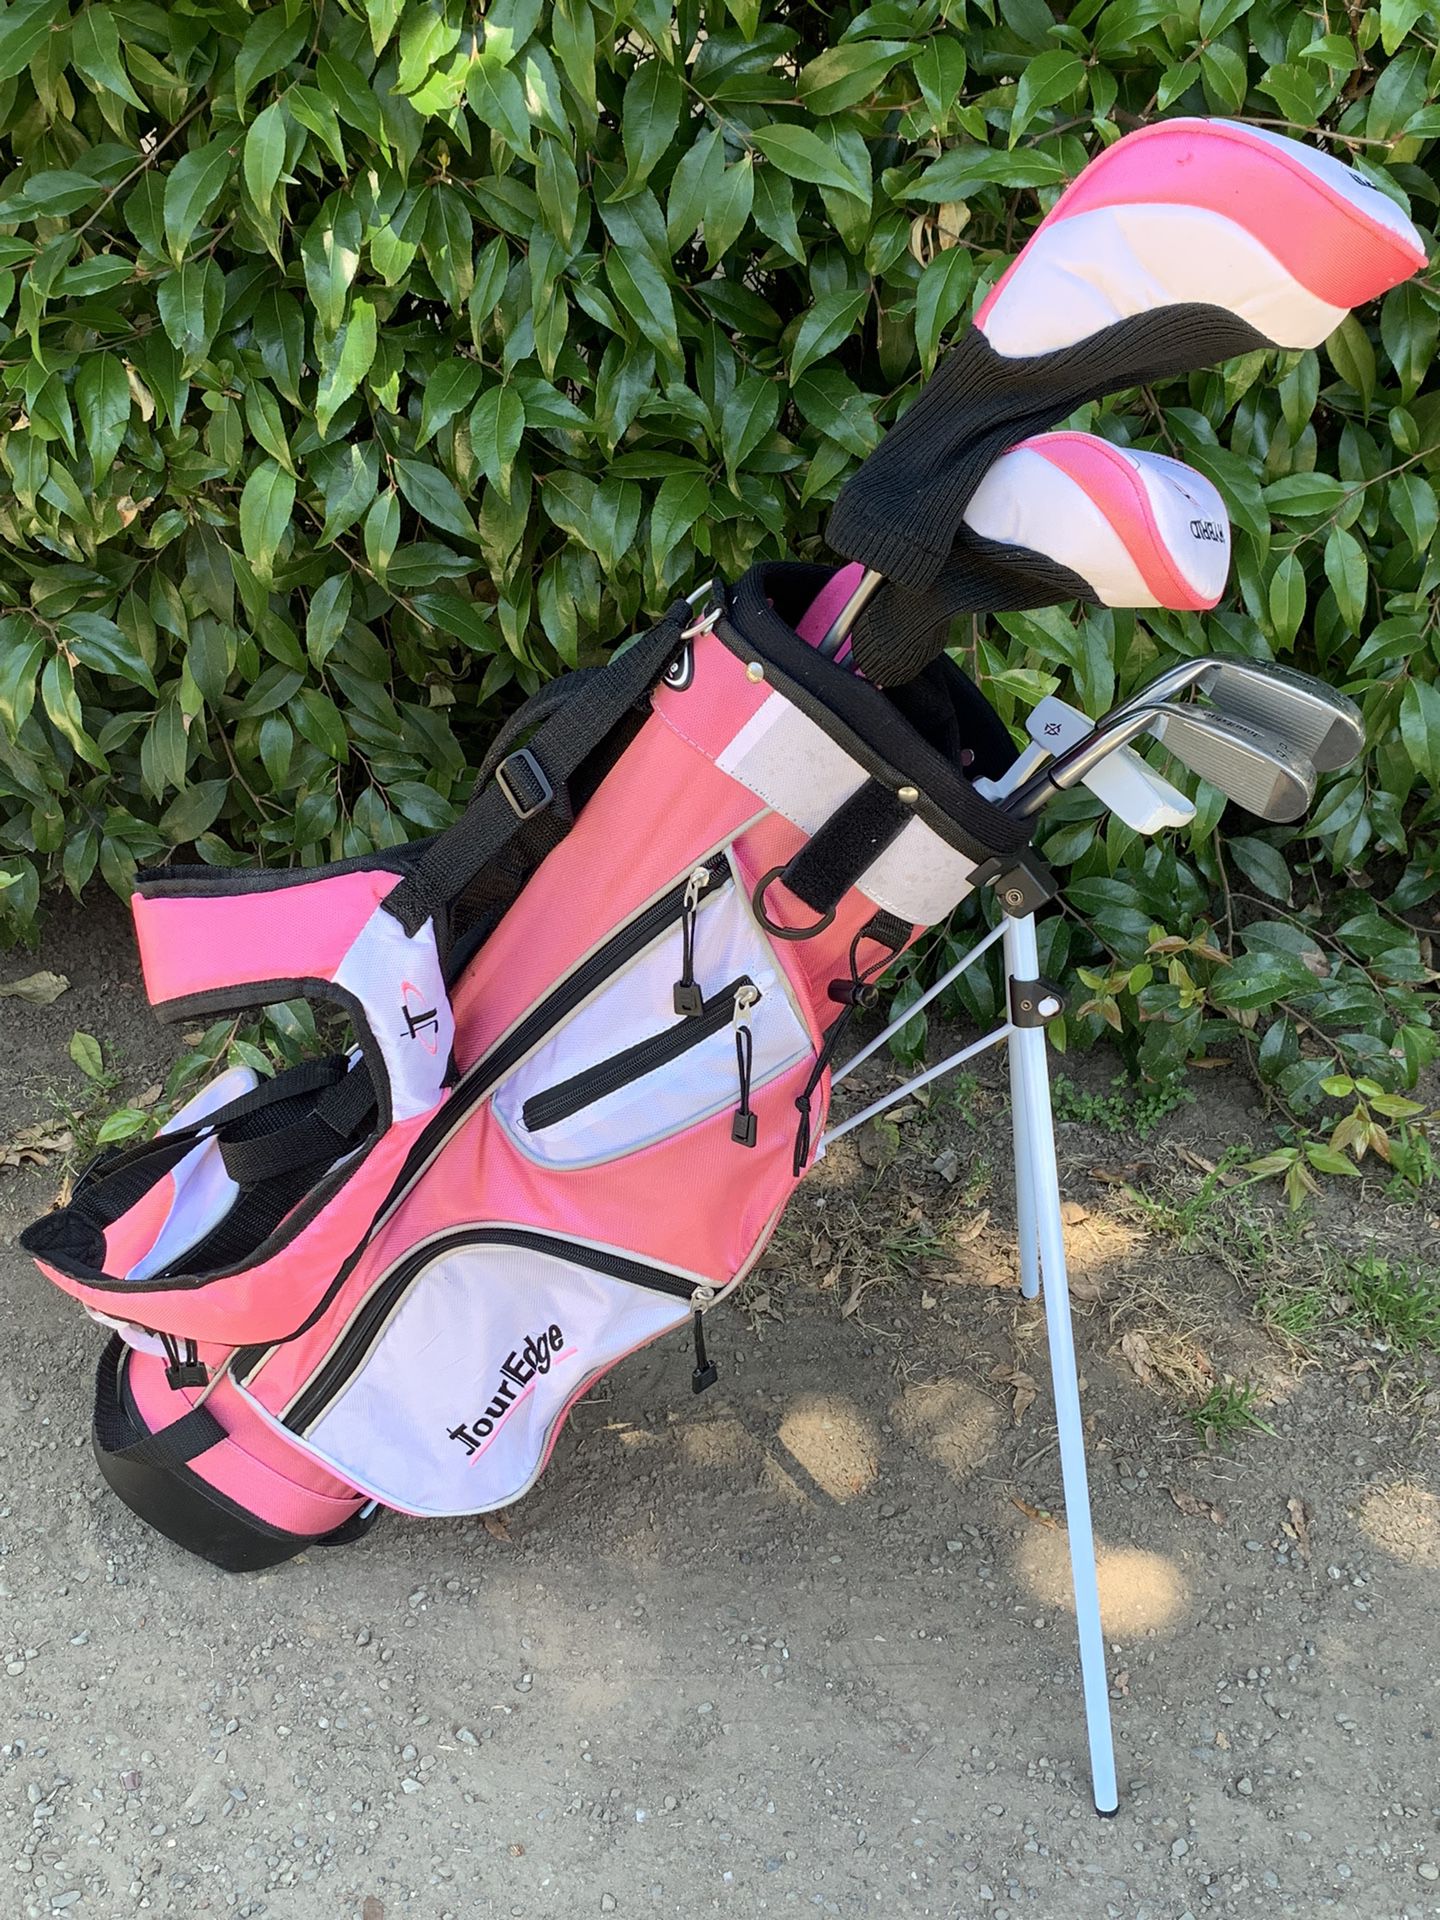 Kids Right Handed Golf Clubs